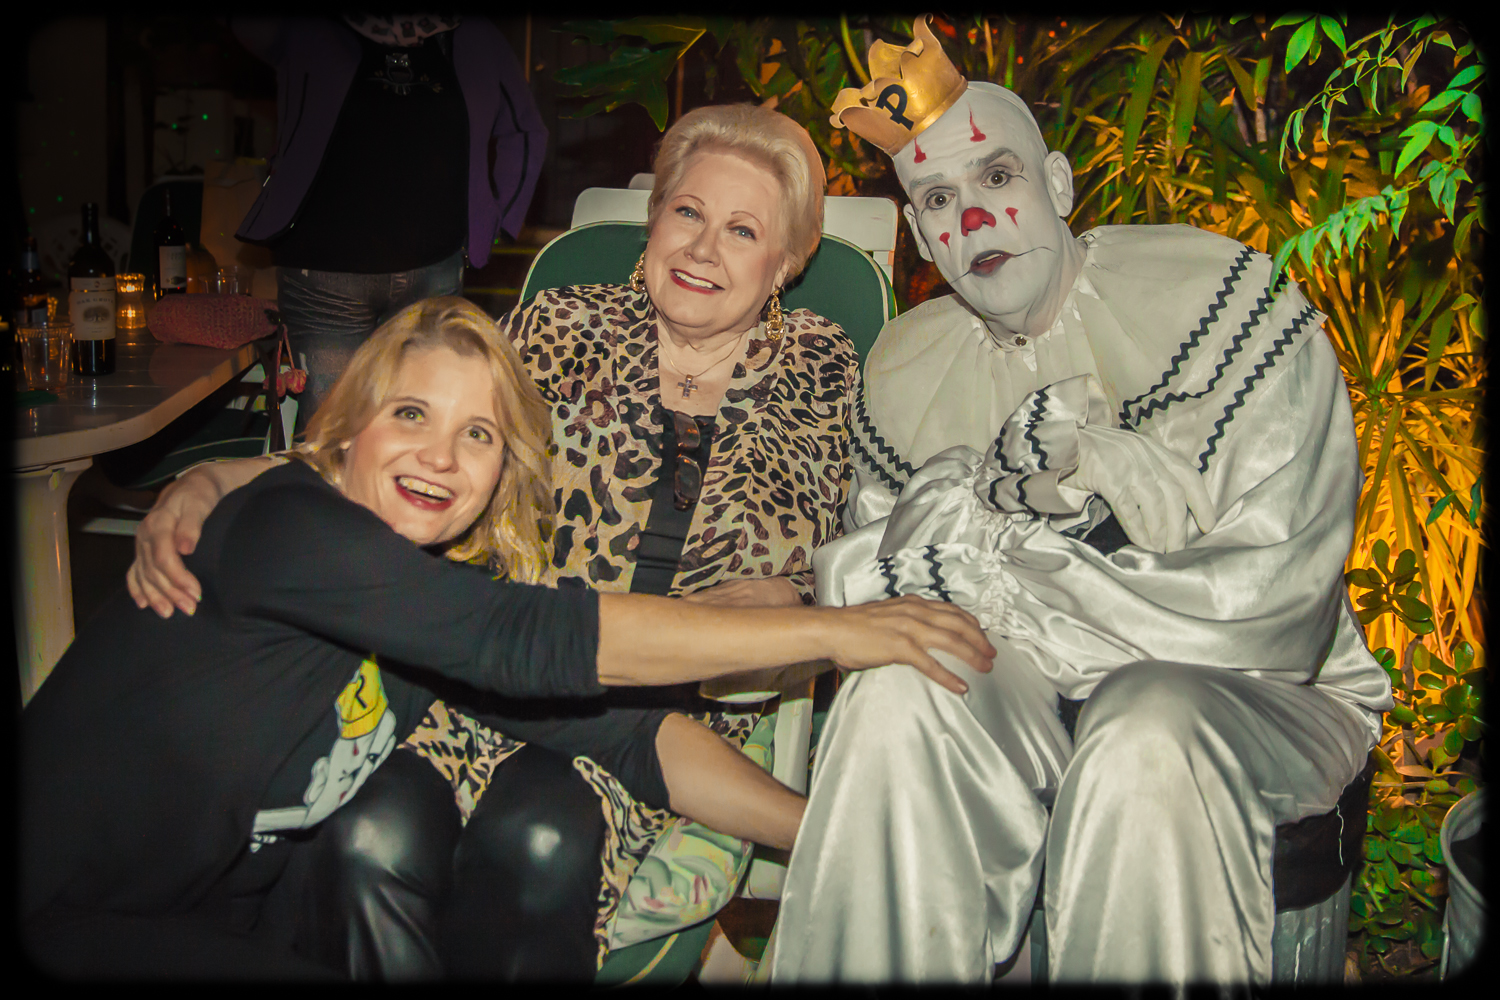 Irene Larsen (center) with daughter Erika and friend Puddles the Clown. Photo: Star Foreman